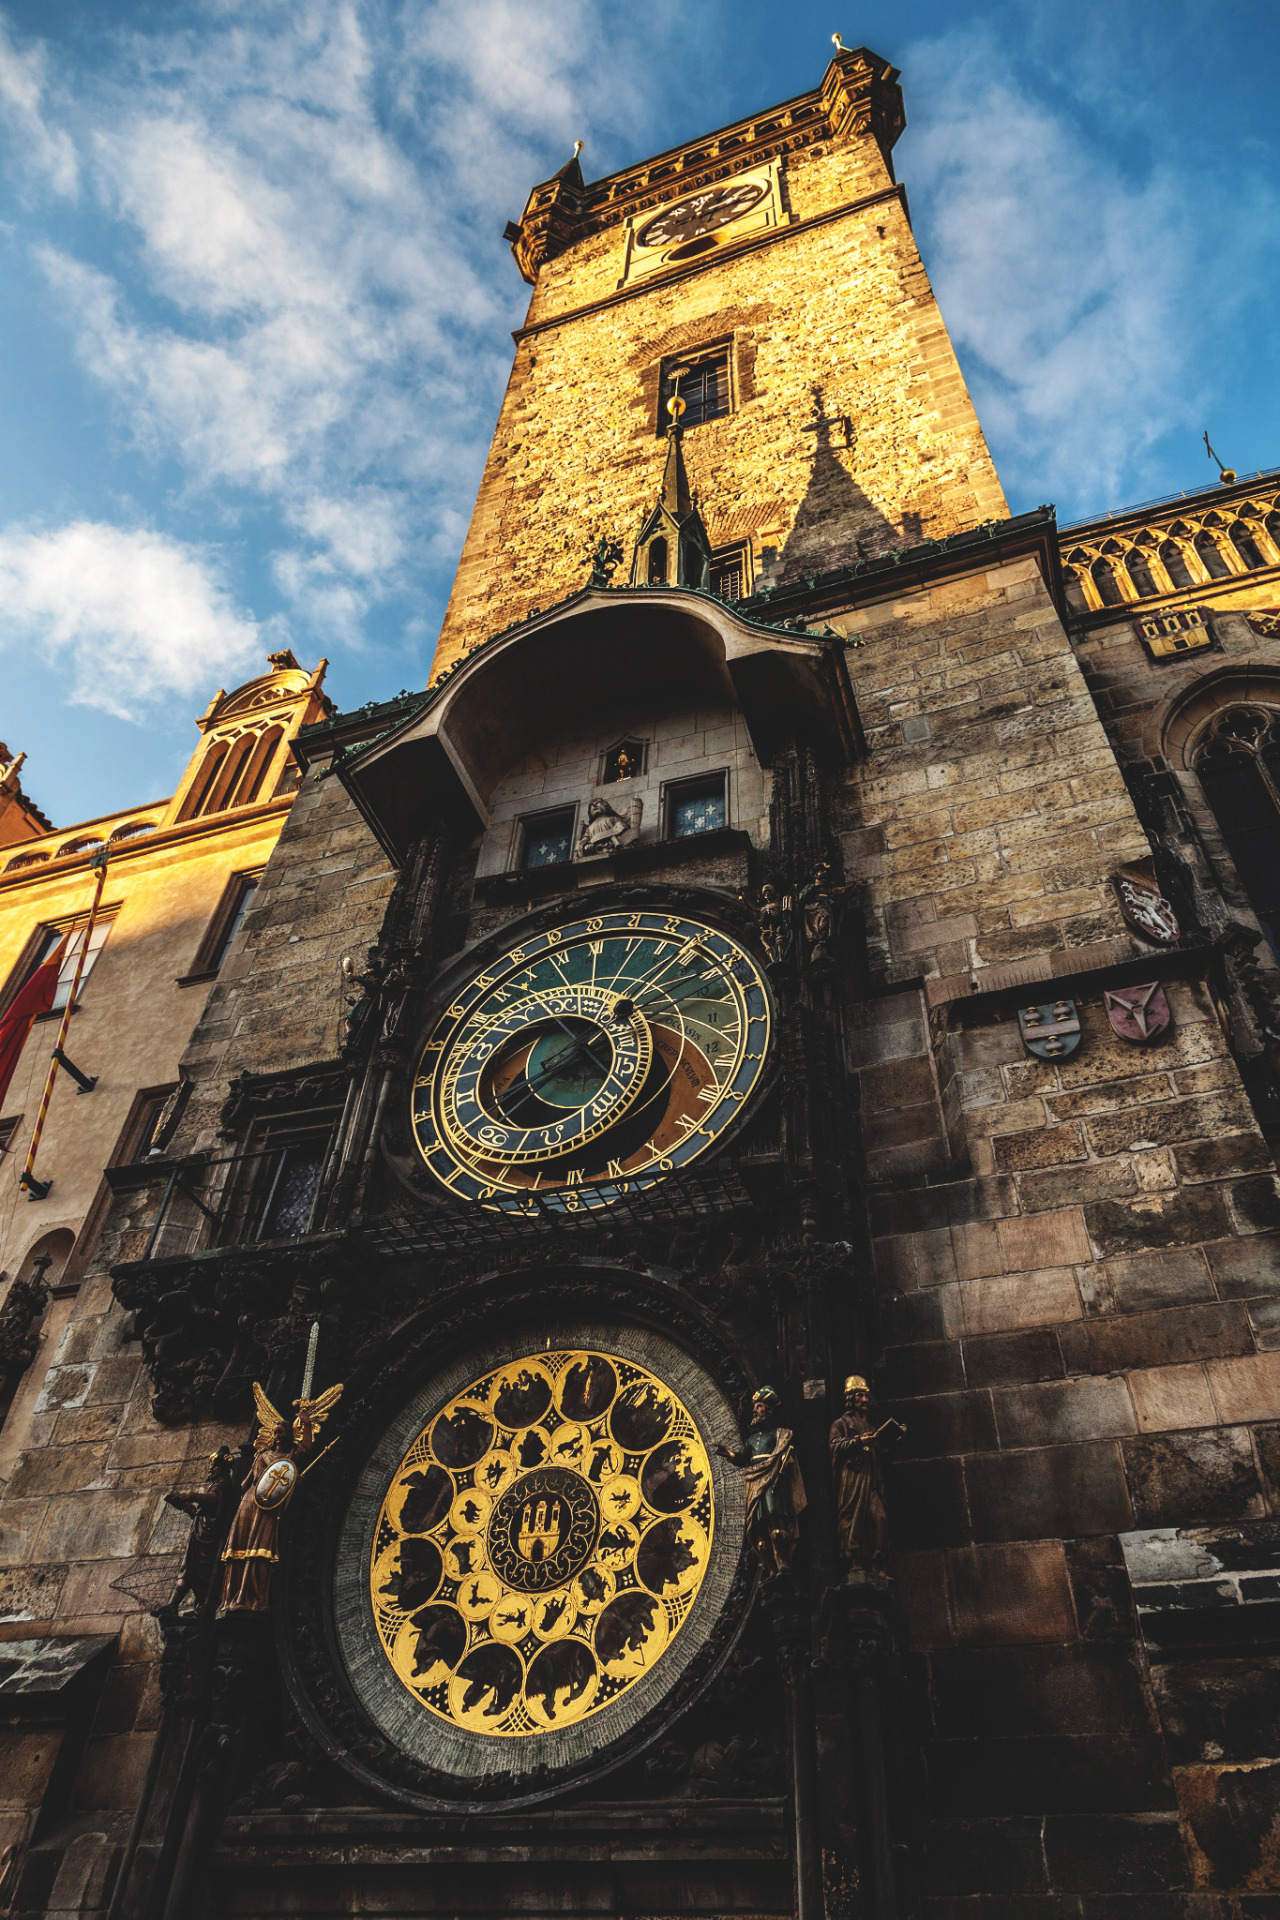 The Prague astronomical clock is the oldest astronomical clock that is still working and displays information such as the relative positions of planetary objects.  Hichem Merabet